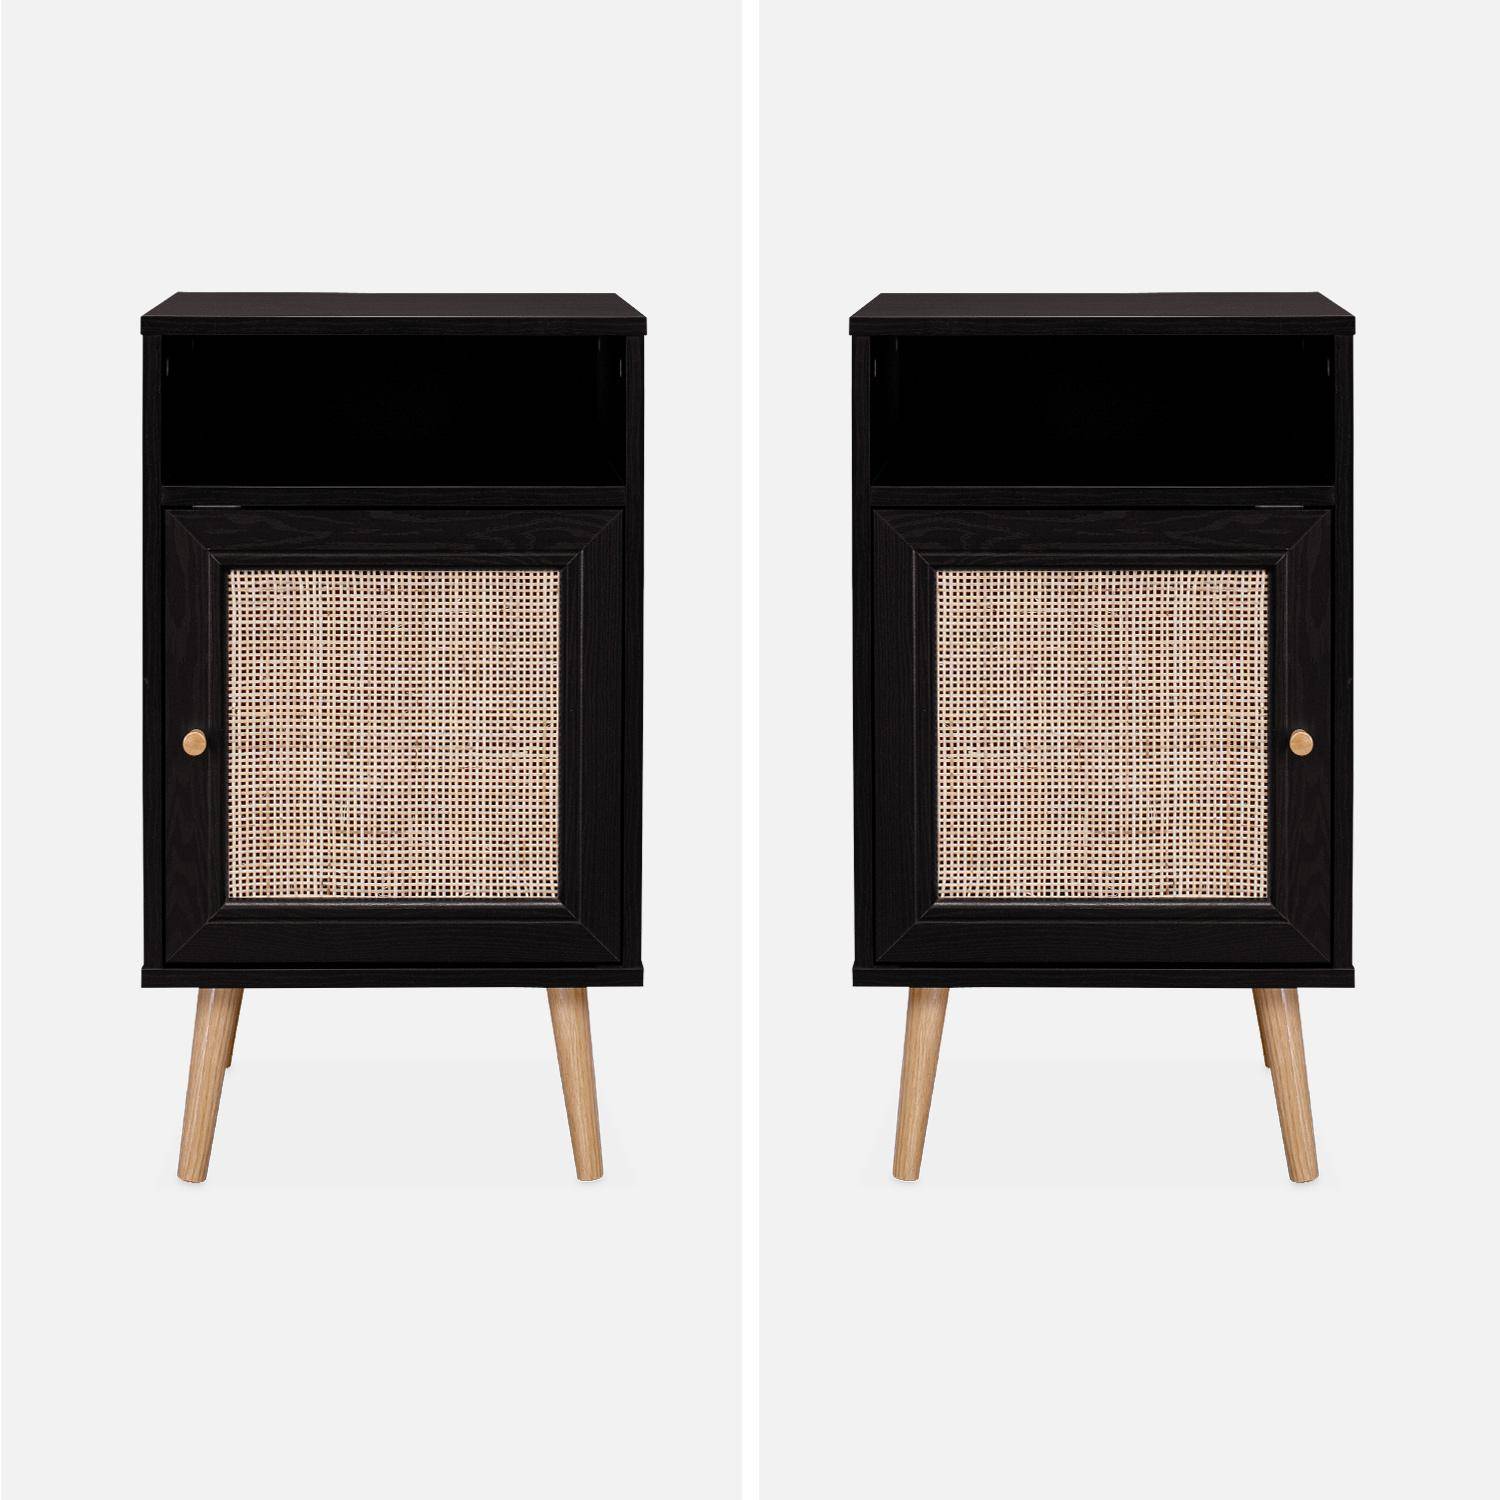 Scandi-style wood and cane rattan bedside table with cupboard, 40x39x70cm - Boheme - Black Photo5